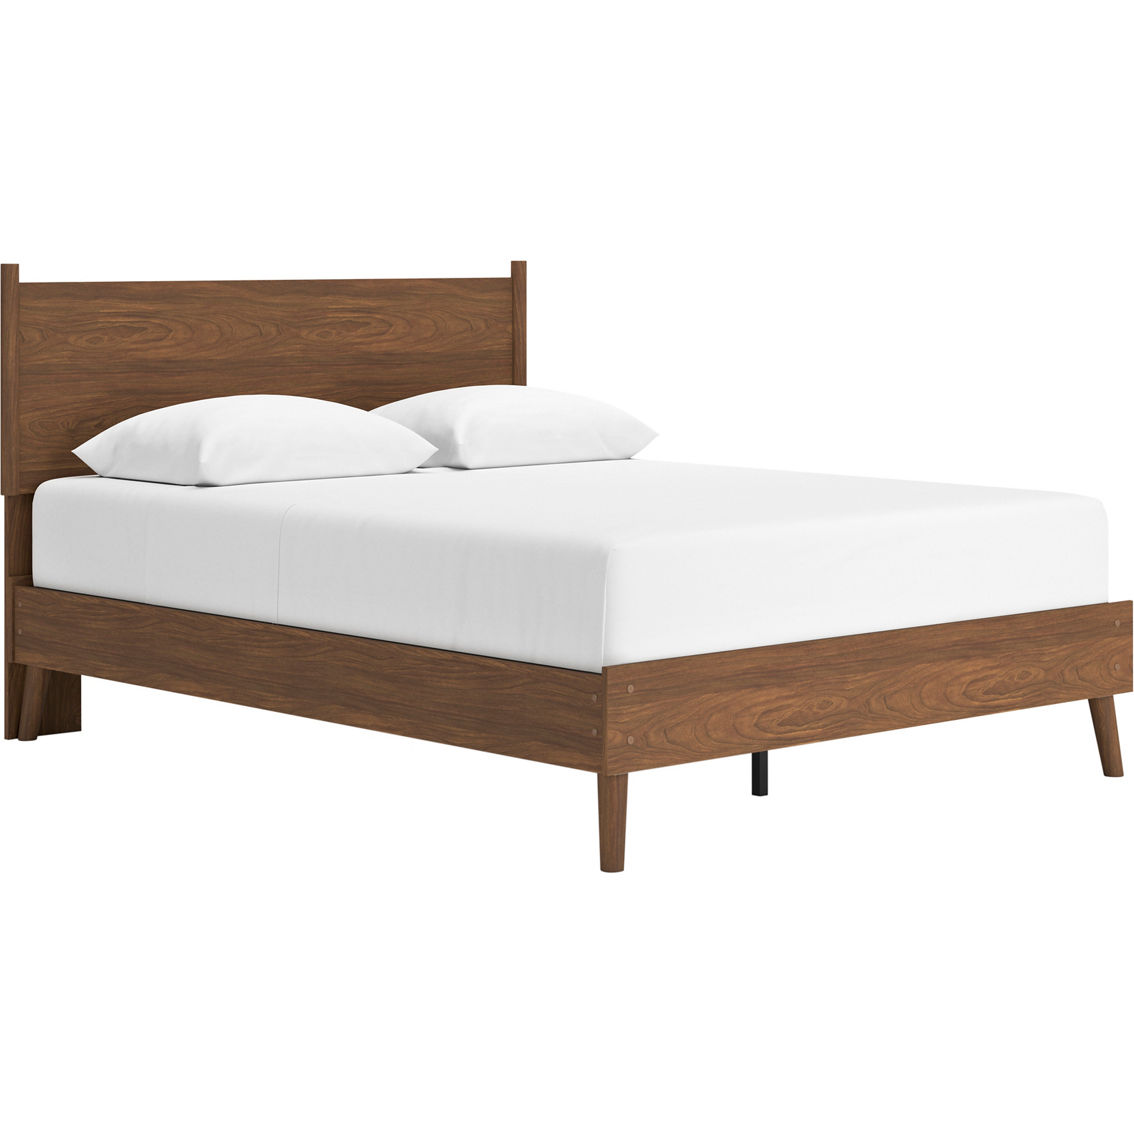 Signature Design by Ashley Fordmont Ready-to-Assemble Platform Bed with Headboard - Image 4 of 7